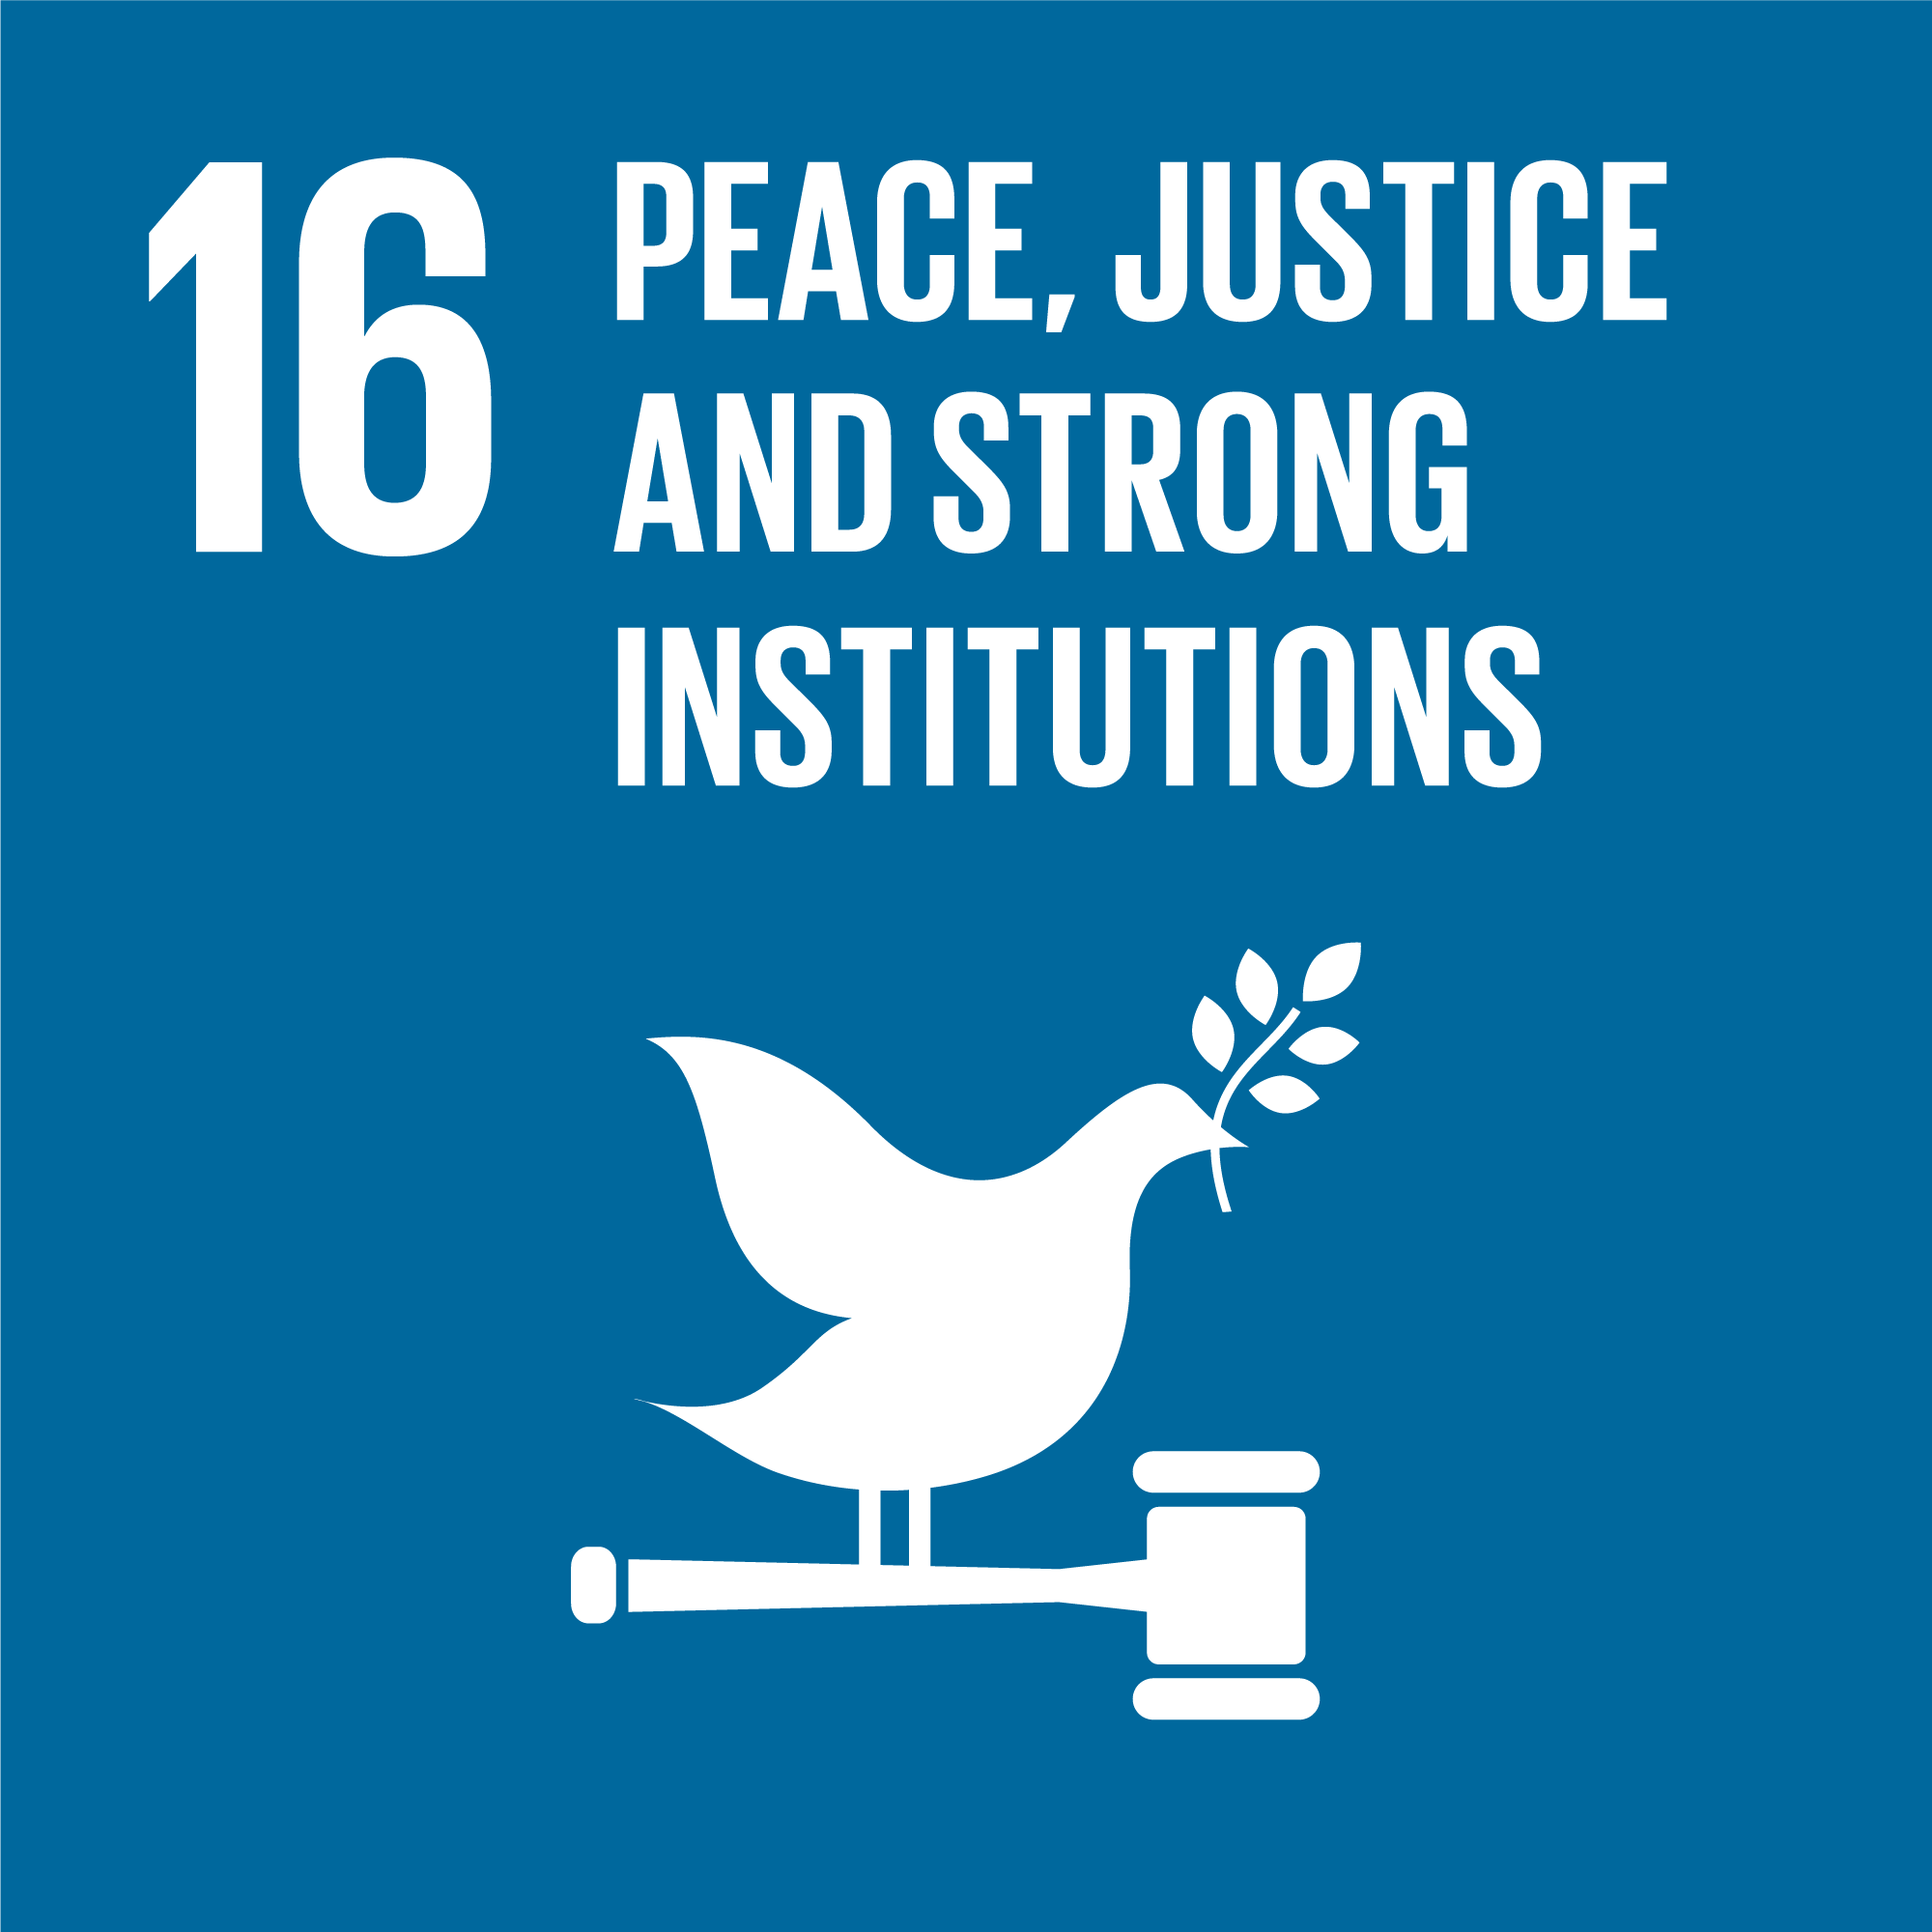 This image for SDG 16